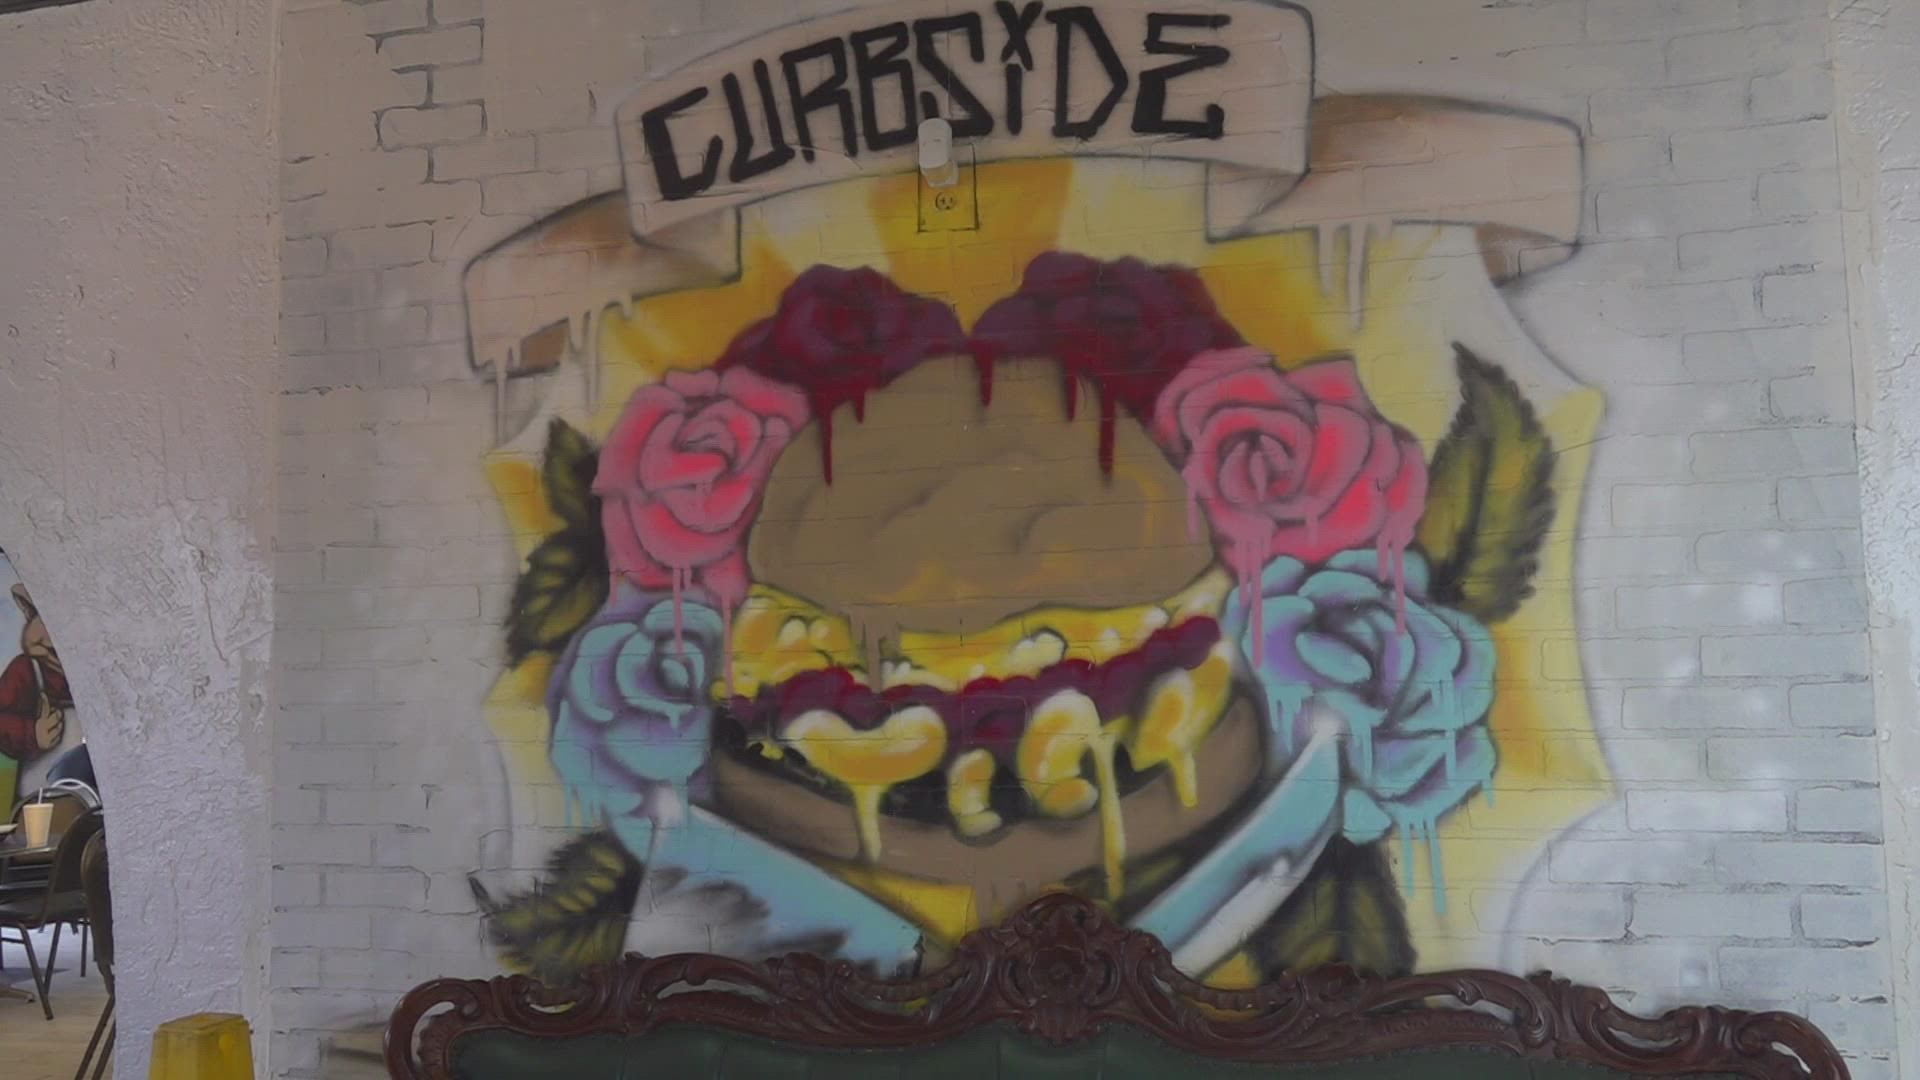 Curbside Bistro was just one of several restaurants that was forced to either close their doors for a few days or take other steps required to remain open.